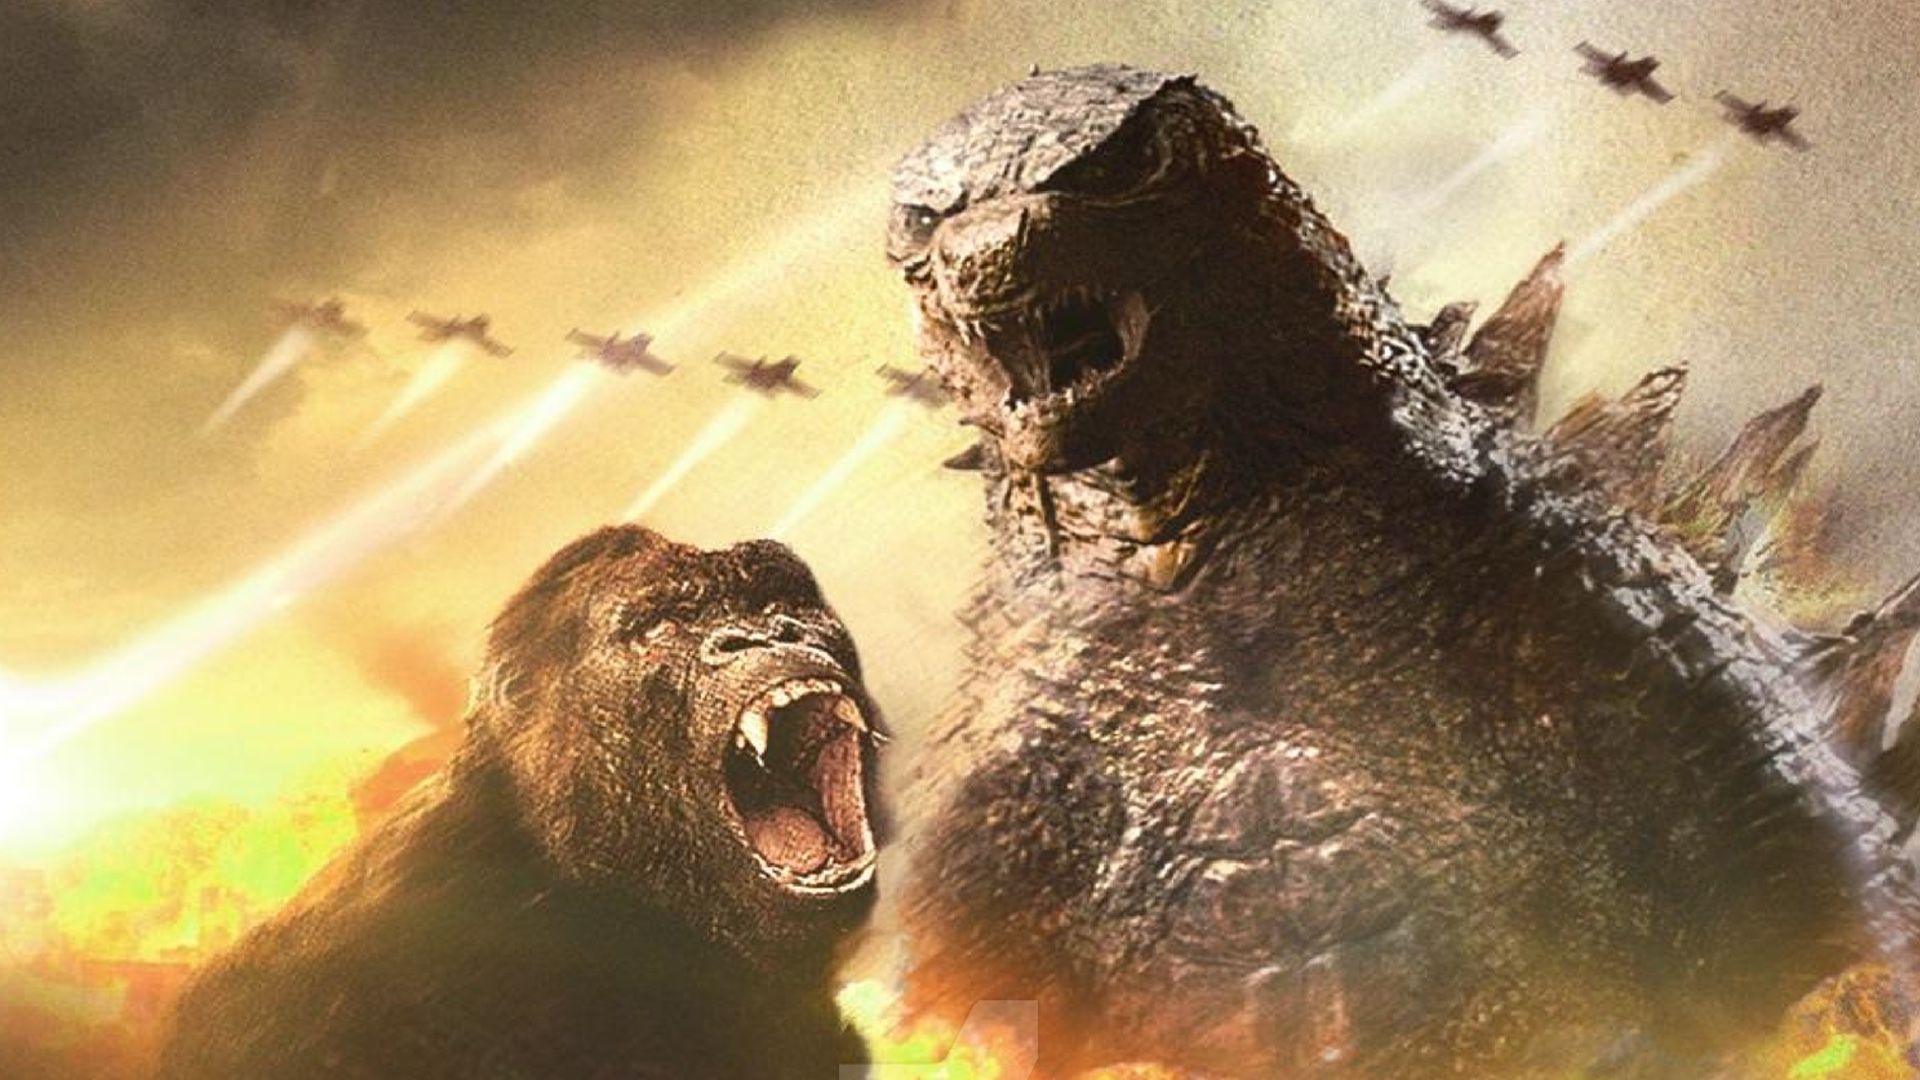 The First Set Photo From GODZILLA VS. KONG Have Surfaced Showing Alexander Skarsgard and Eiza Gonzalez